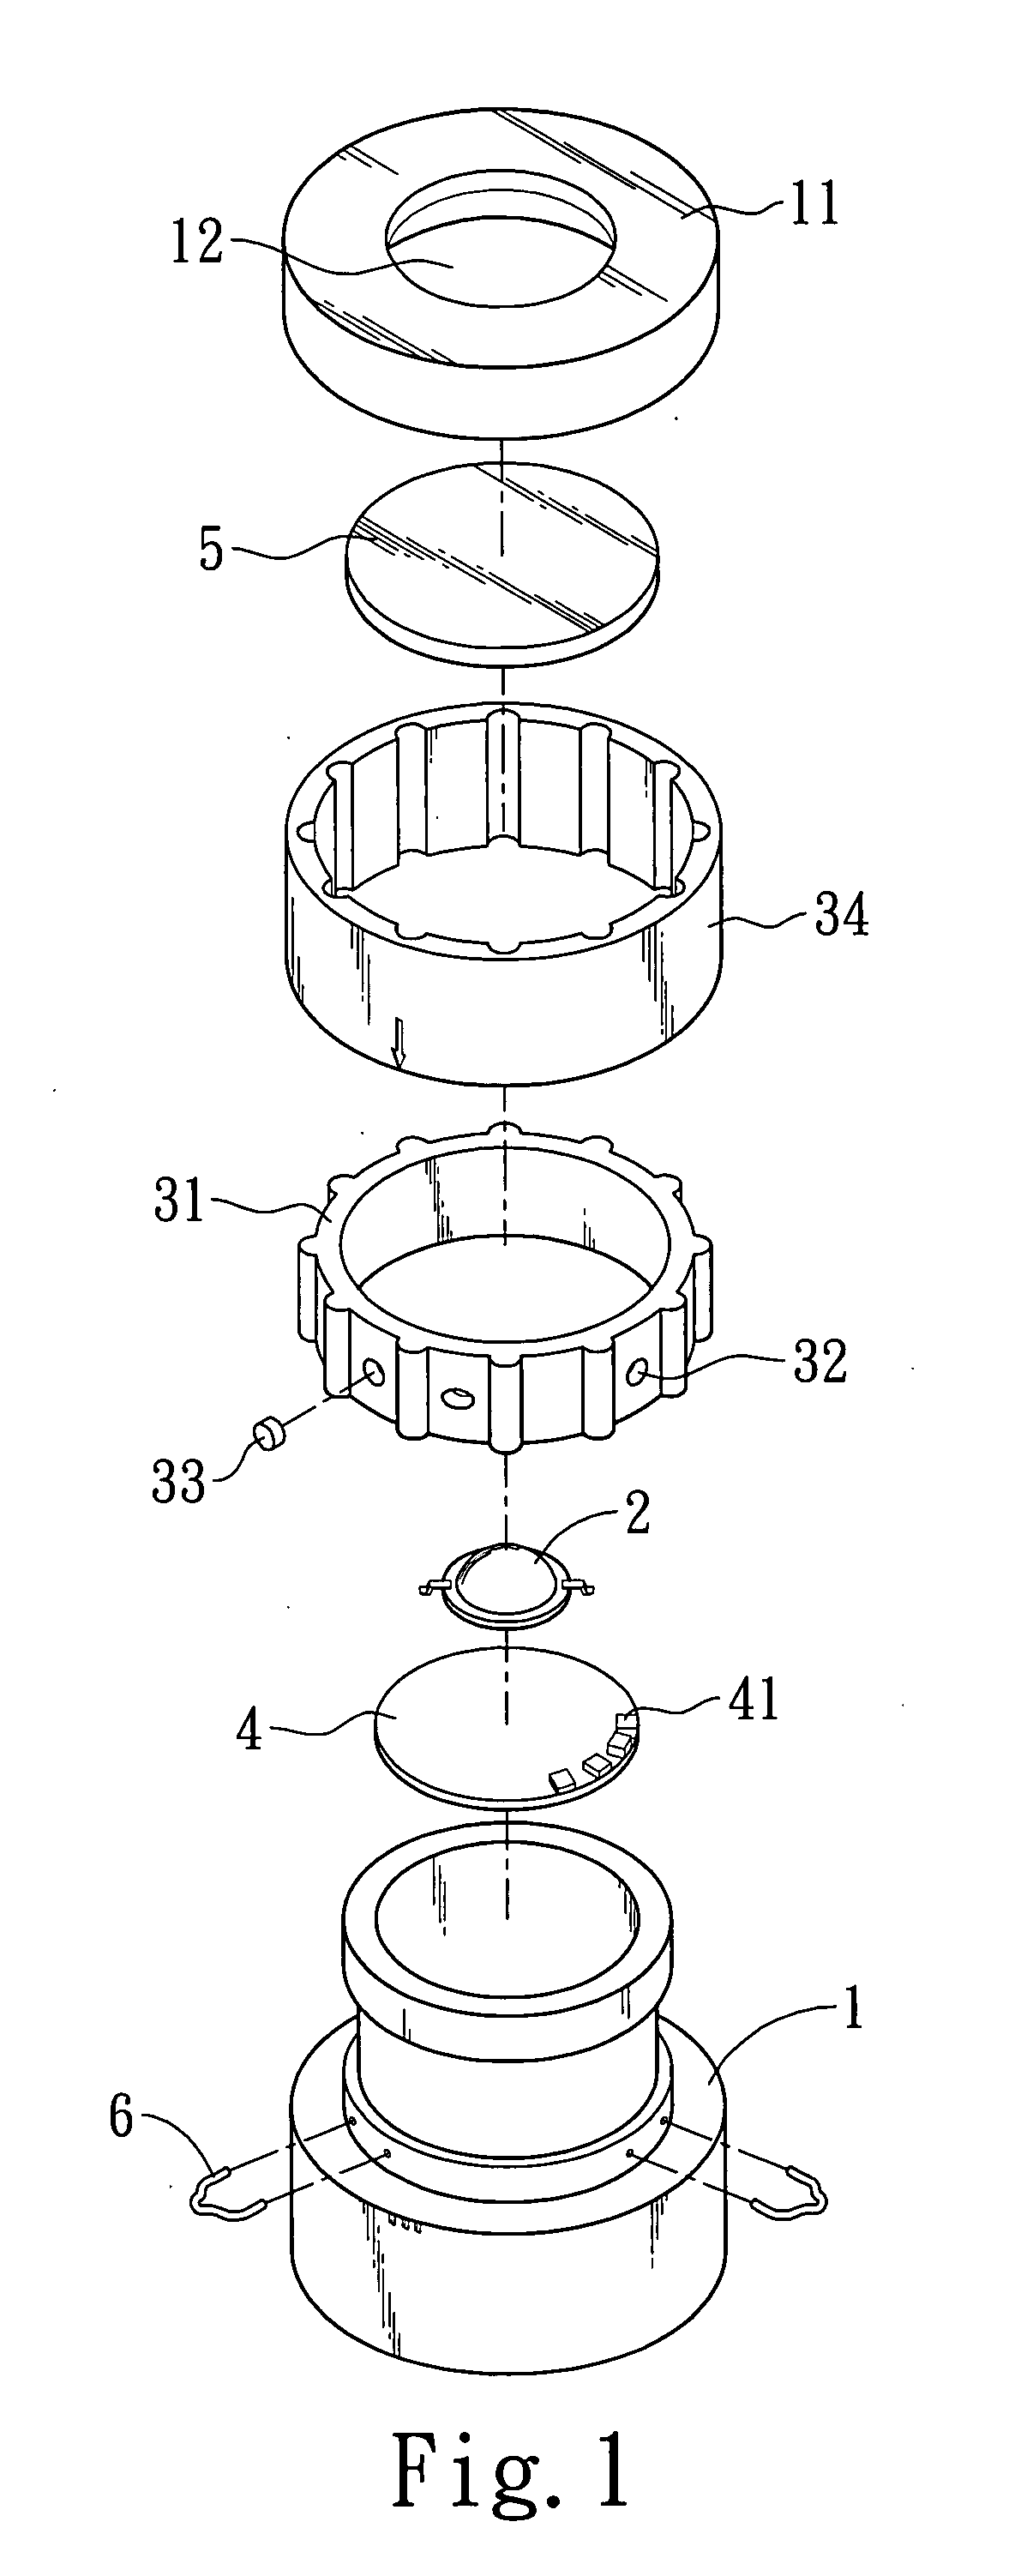 Lighting device with a magnetic switch